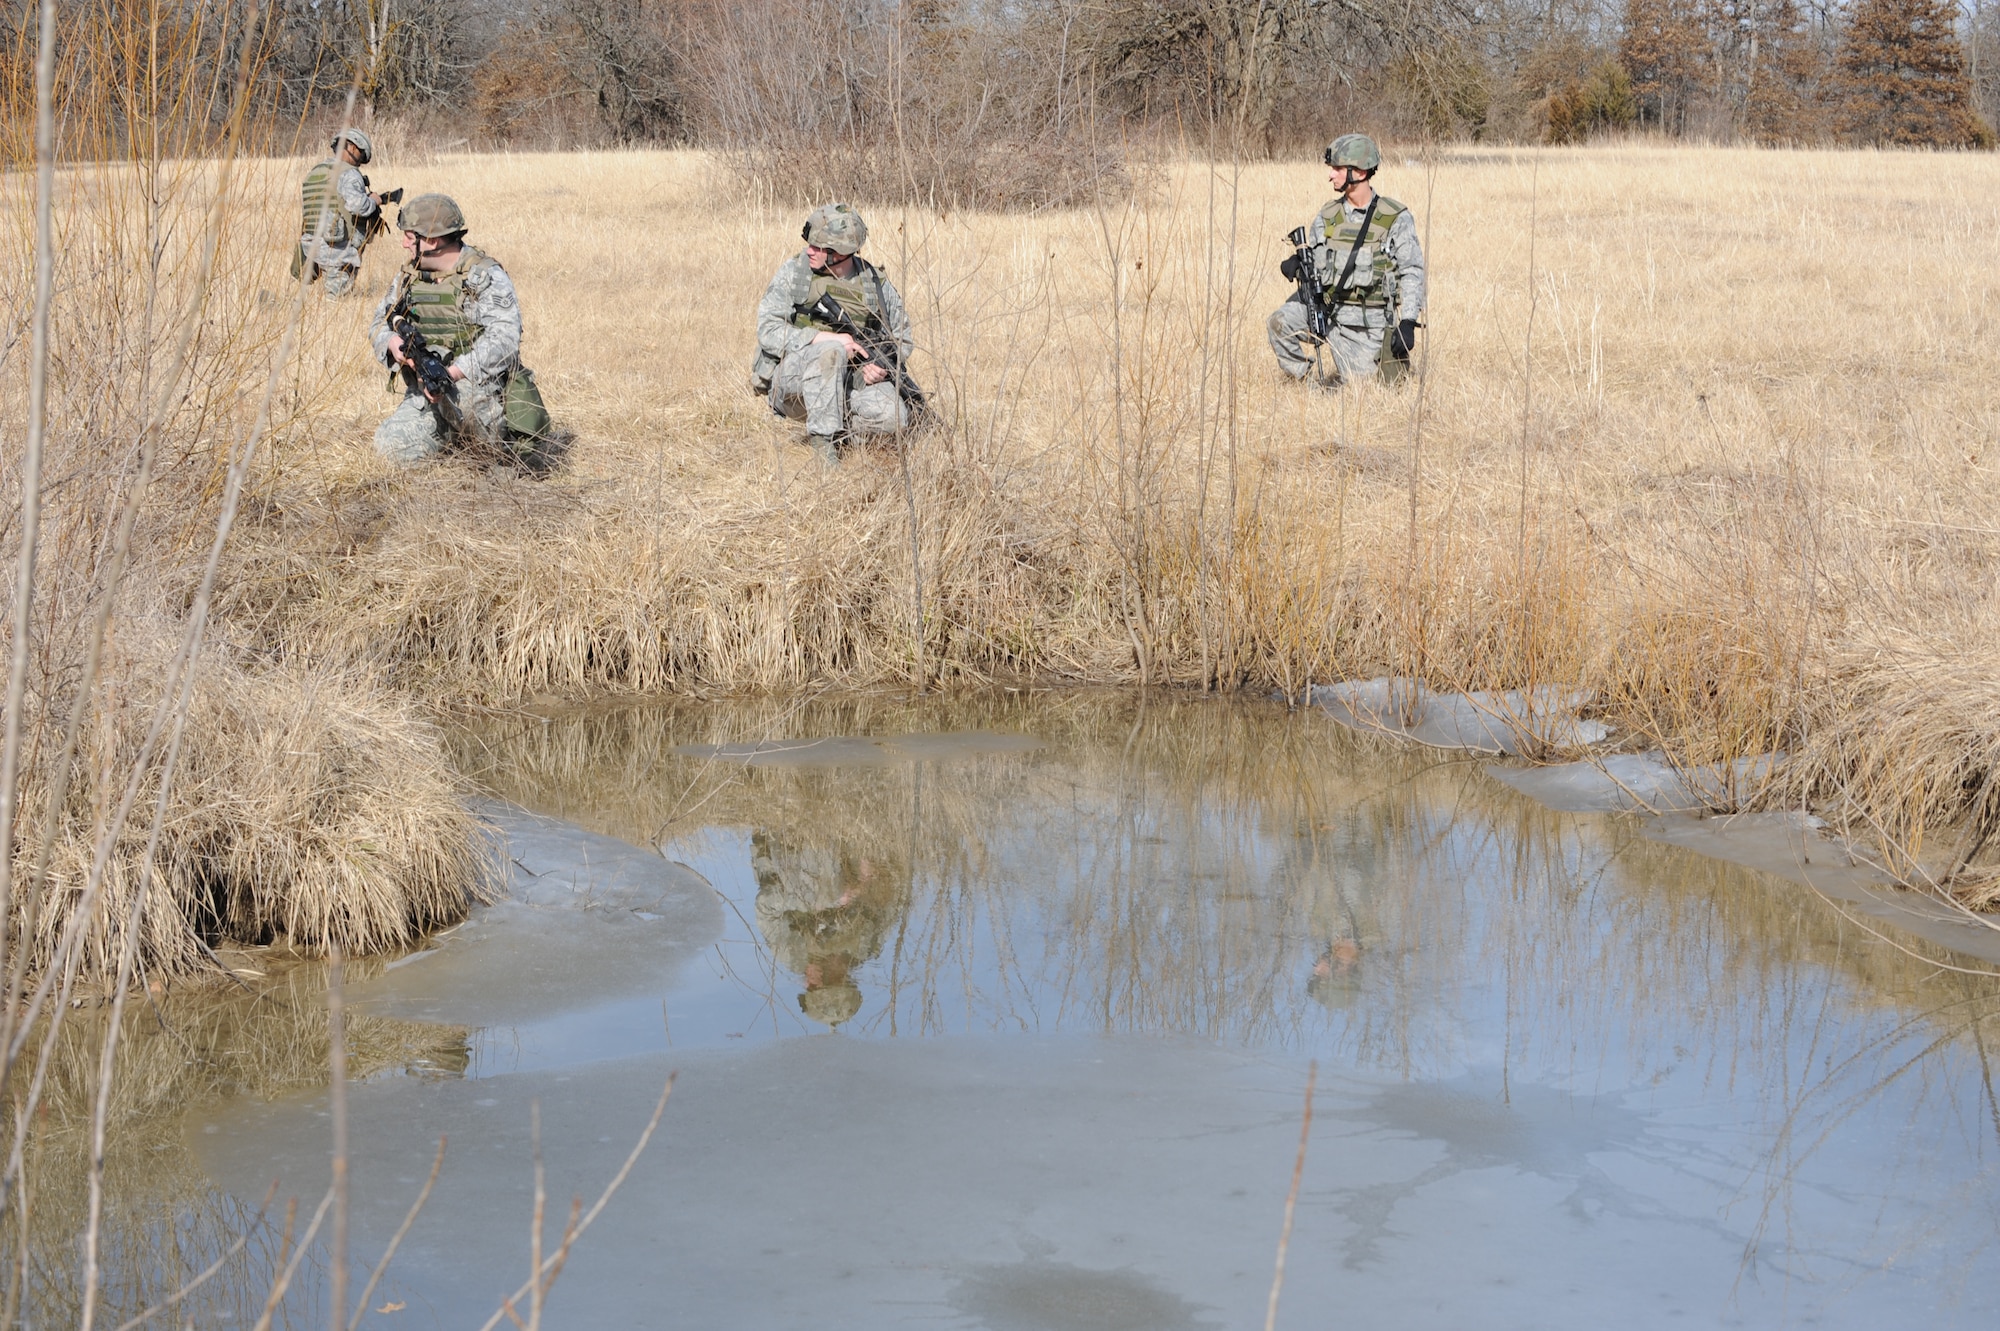 WHITEMAN AIR FORCE BASE, Mo. – Airmen from the 509th Security Forces Squadron await instructions to maneuver team members at the Cobra training site during the Blue Coach training course  Feb. 6. (U.S. Air Force photo/Staff Sgt. Charles Larkin)                                        